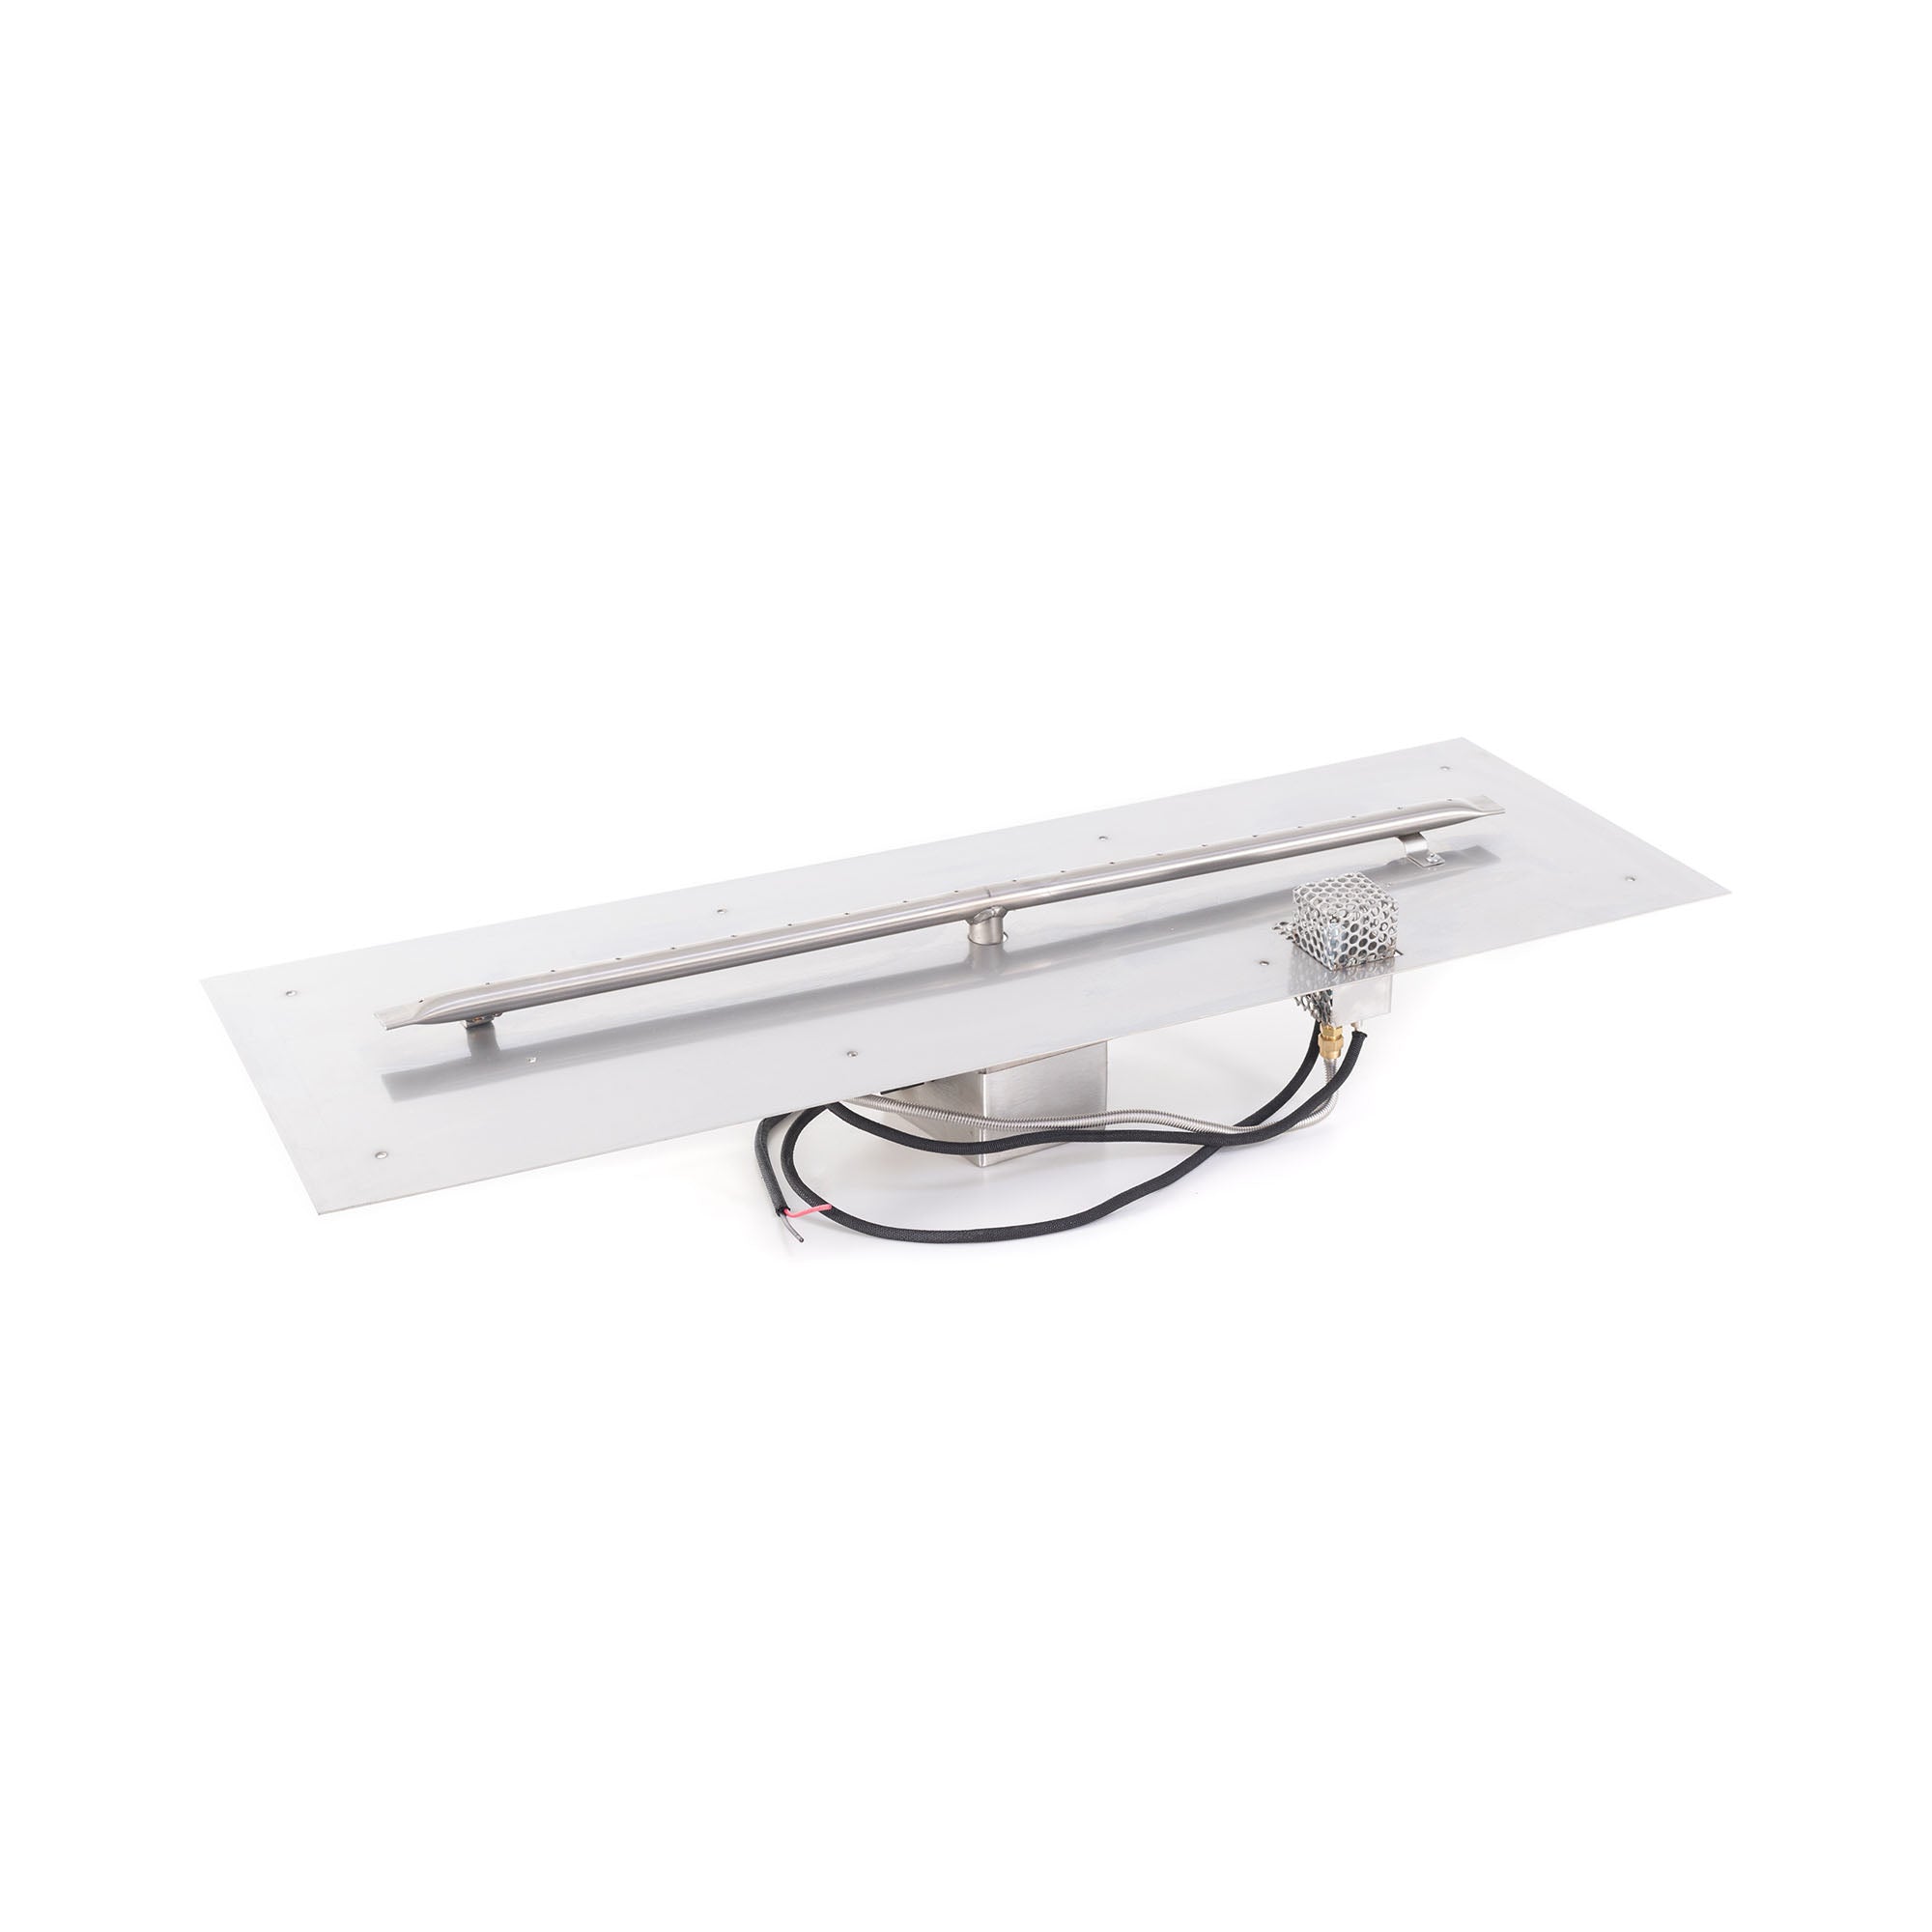 The Outdoor Plus - 24 Inch Rectangular Stainless Steel Flat Pan and 18 Inch Linear Burner - OPT-REFS824